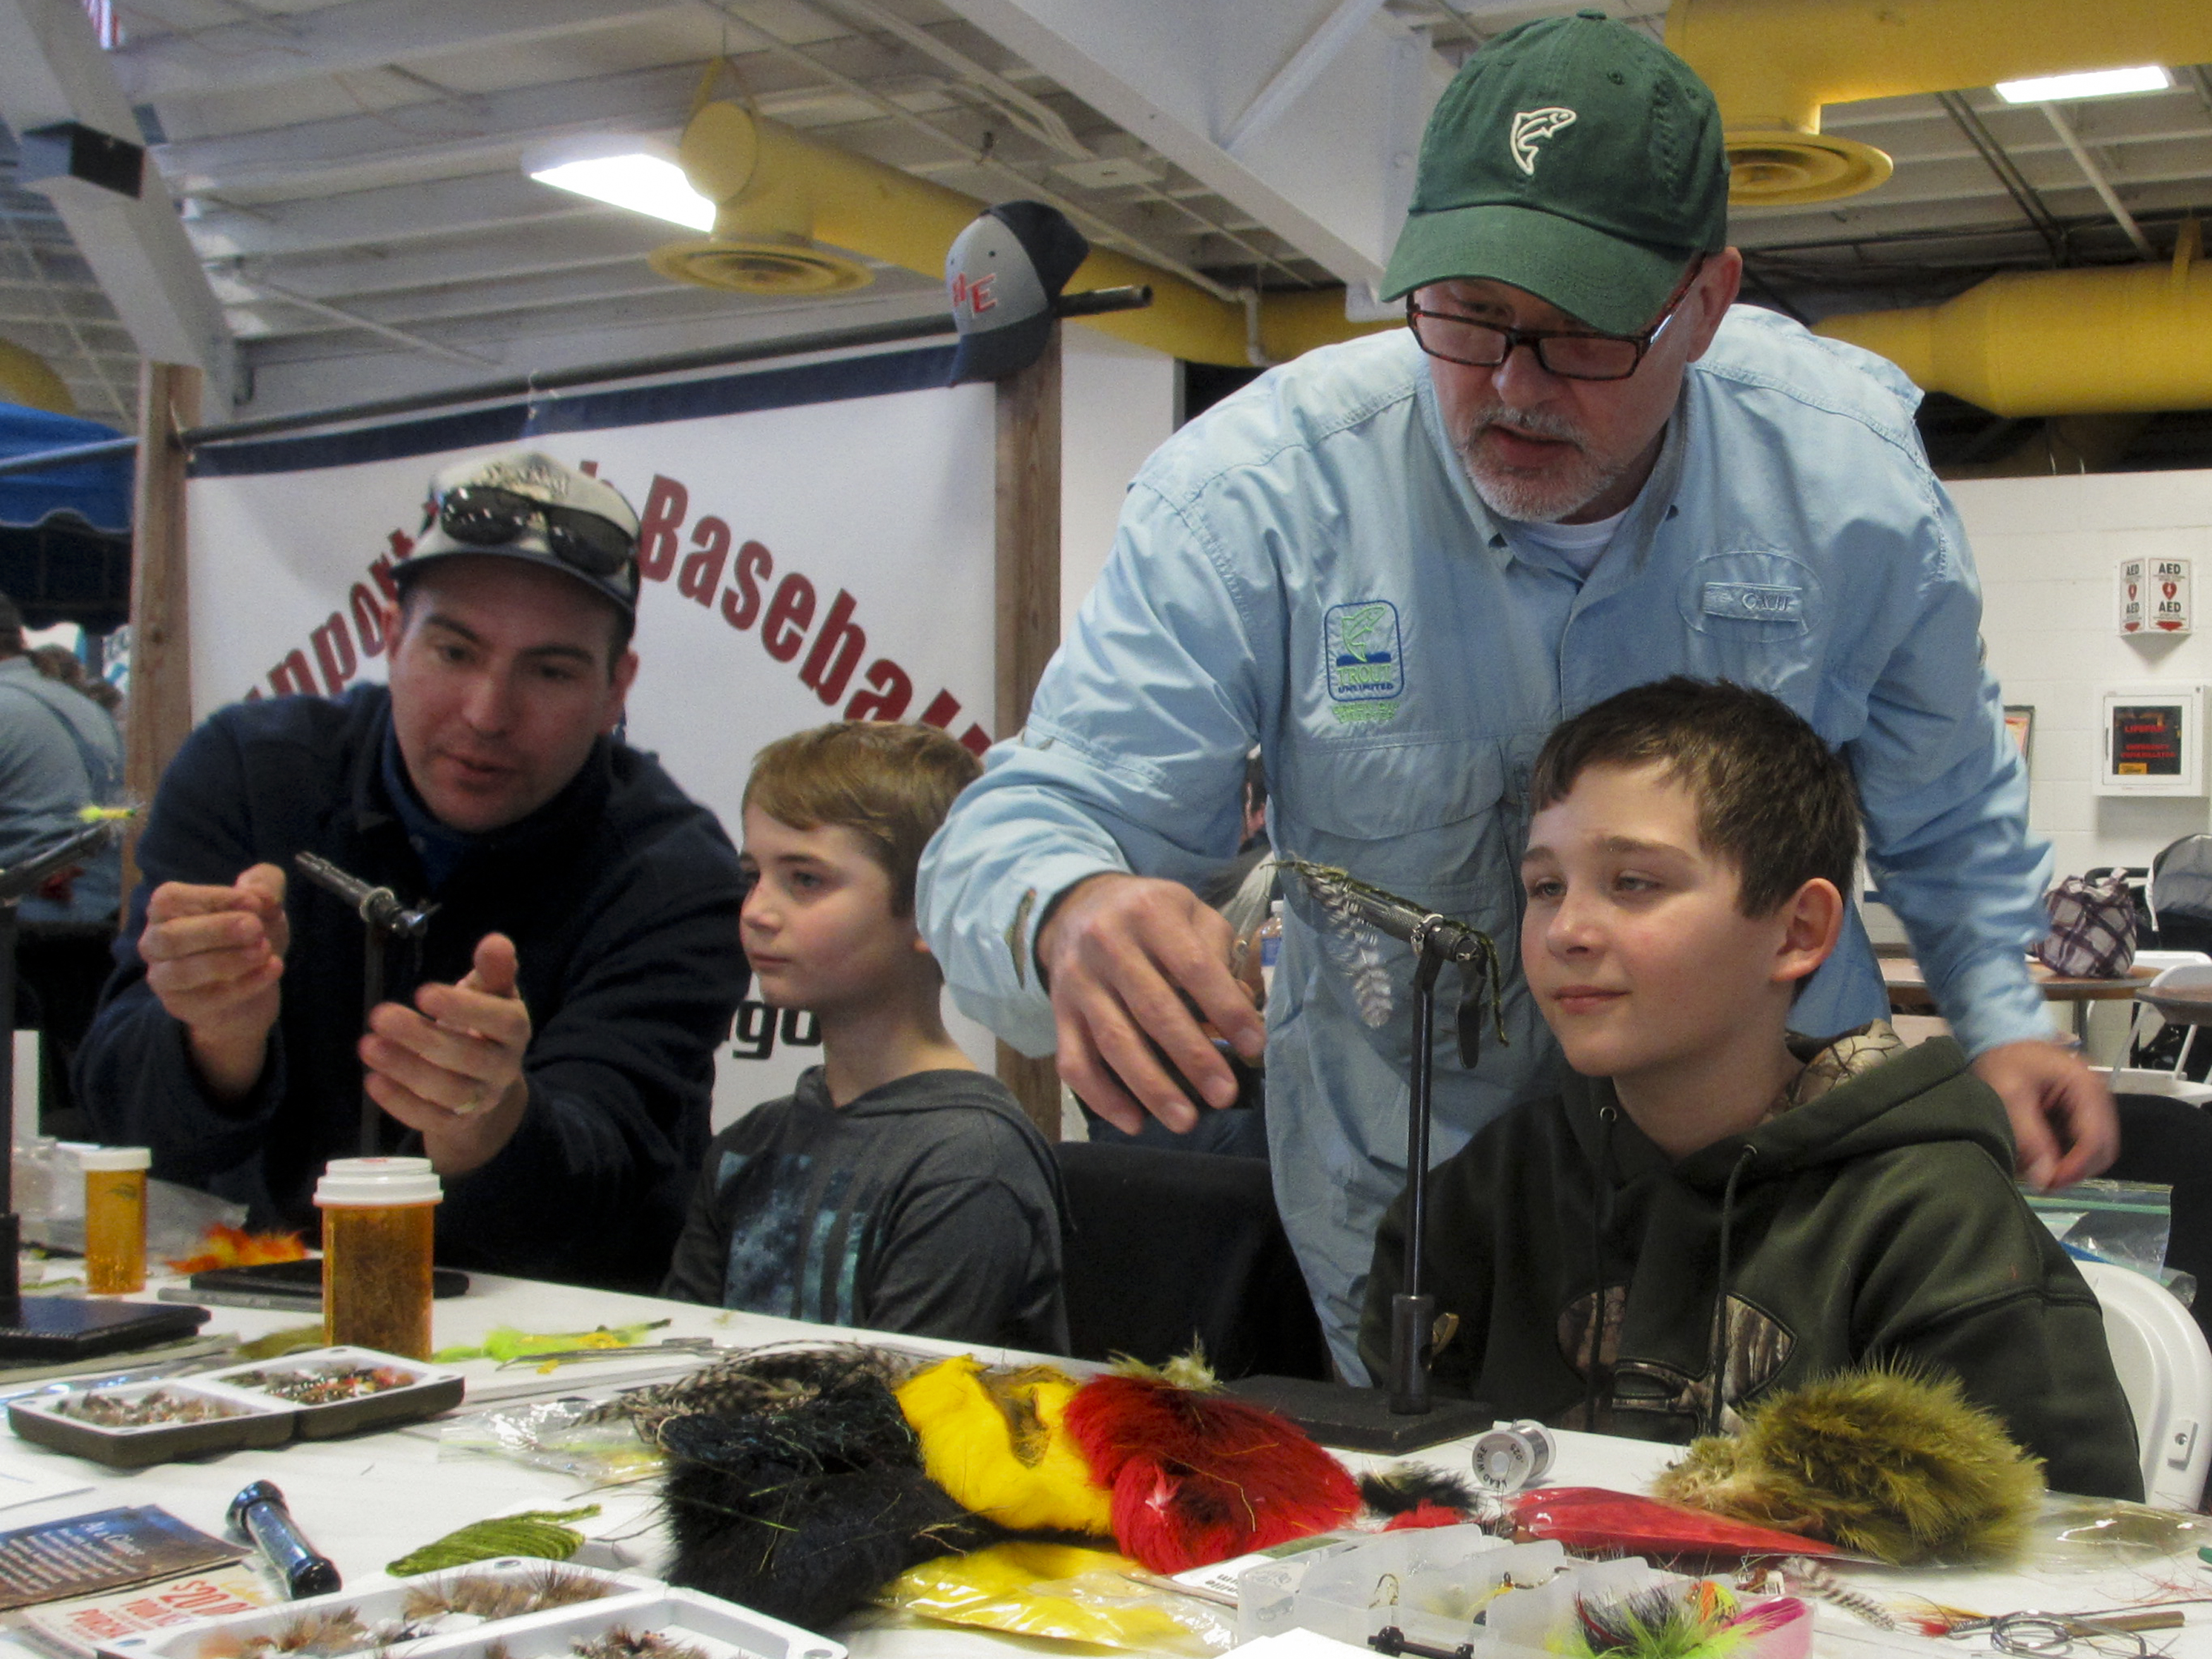 Adrian Meseberg and Mike Renish tying flies with youth at Sunnyview Expo Center outside Oshkosh